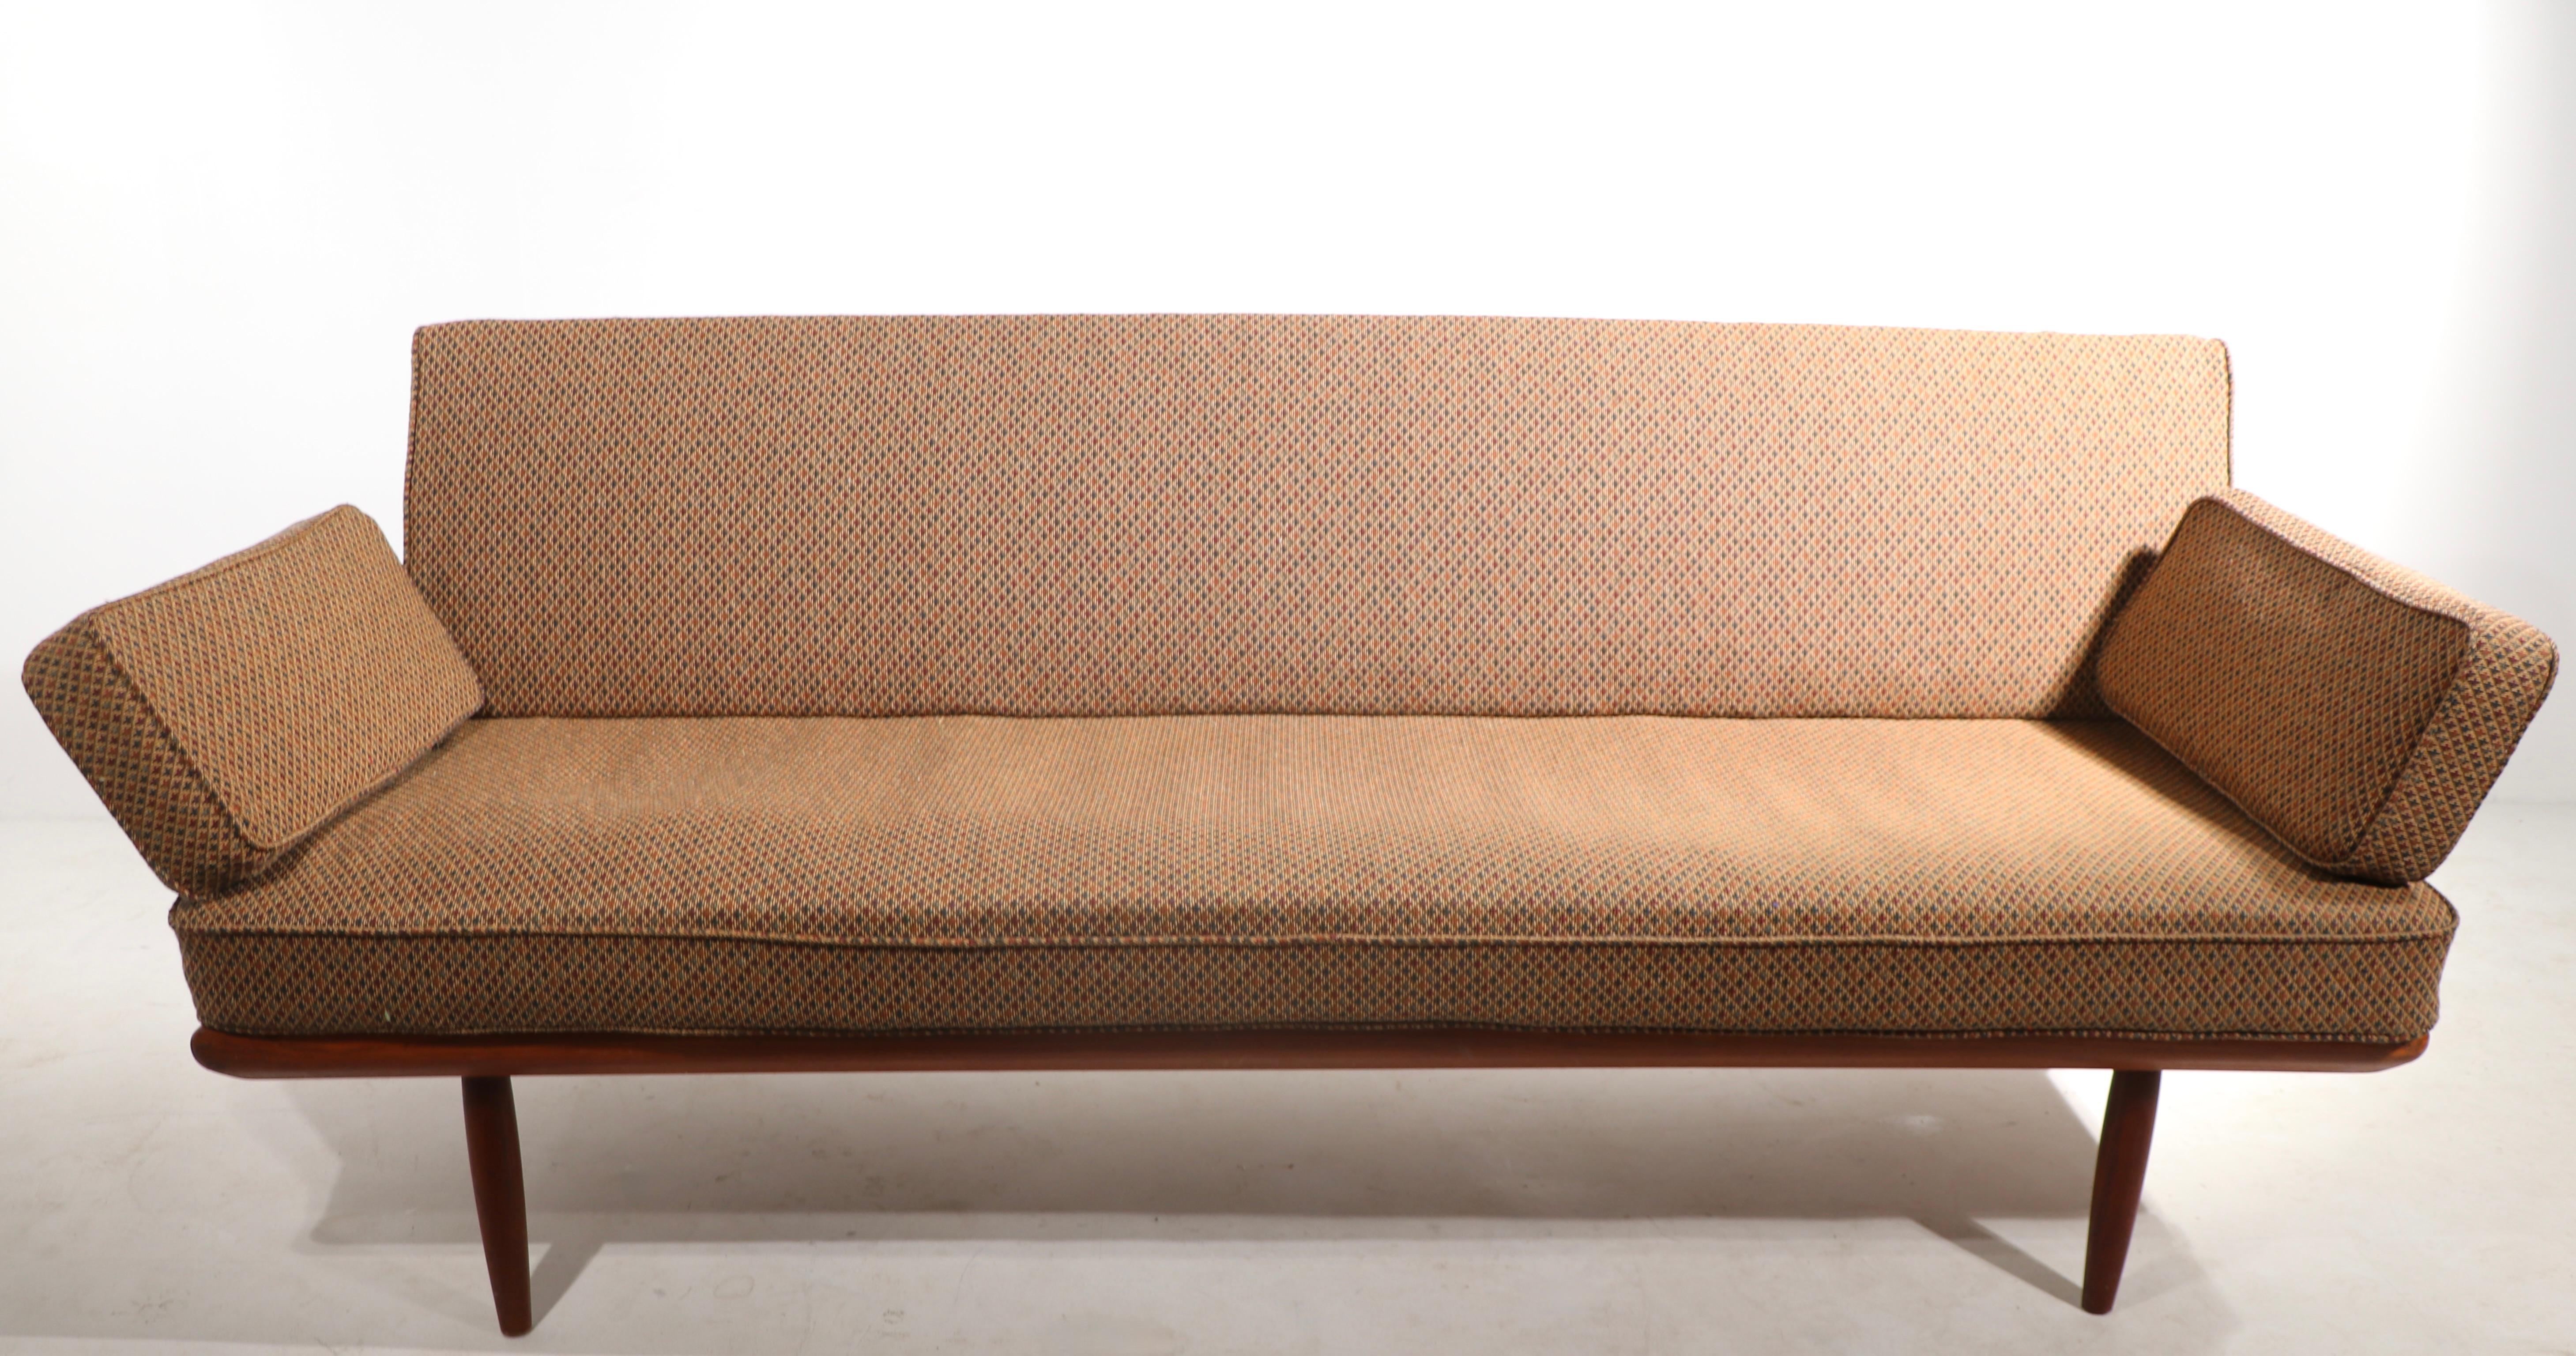 Truly a design icon, the Minerva sofa, daybed designed by Peter Hvidt and Olga Molgaard, executed in teak, and upholstery. The sofa has removable arms, to convert into a daybed. This example is in very good, original condition, clean and ready to